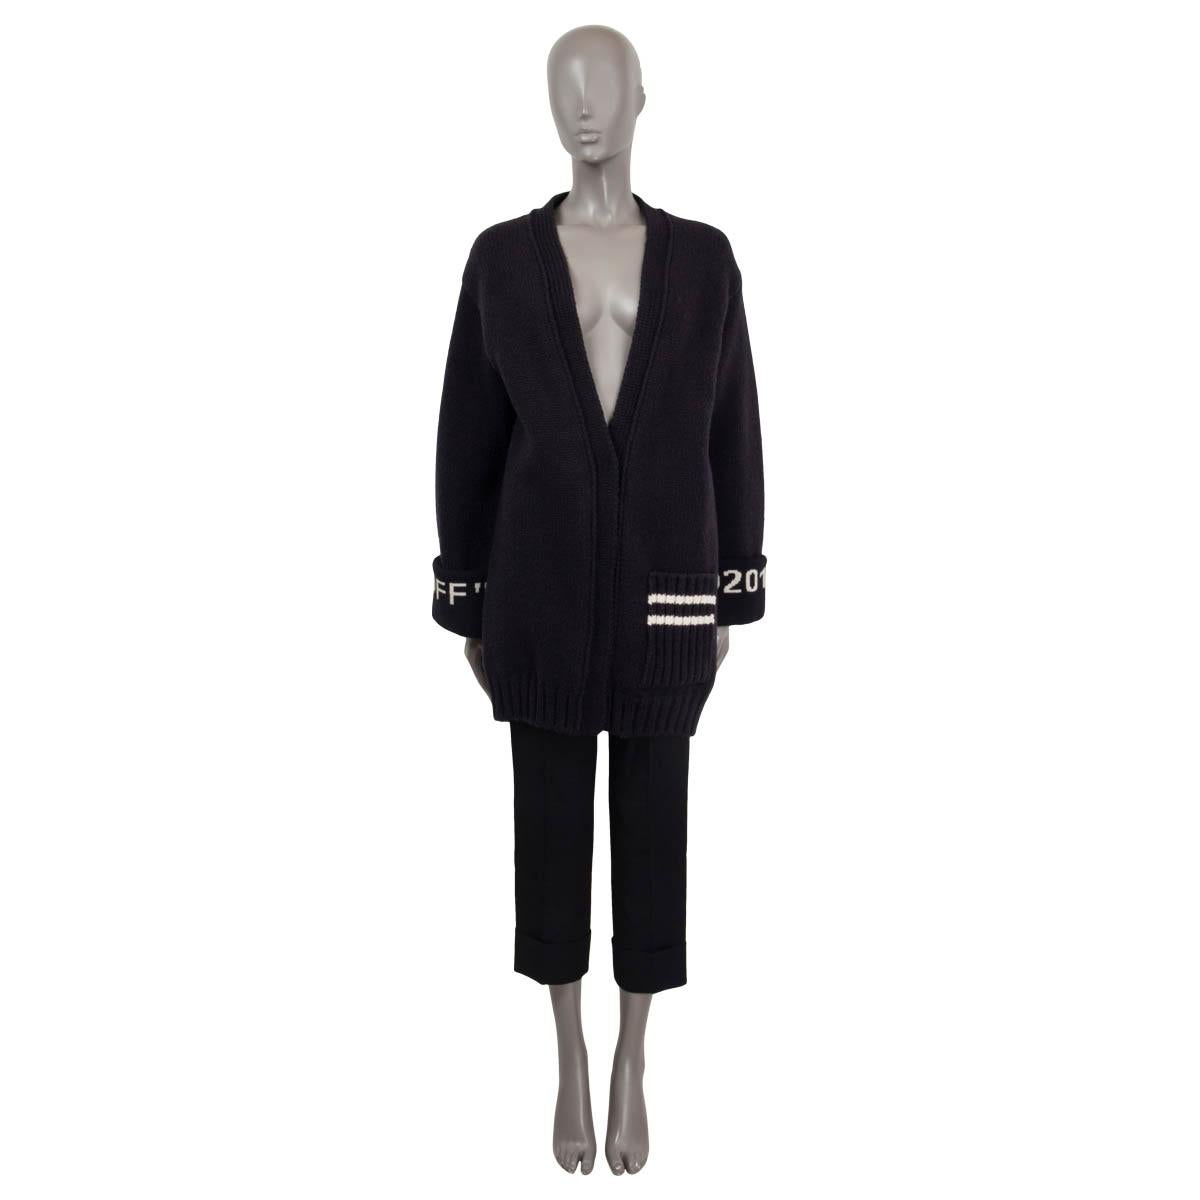 100% authentic Off-White 2013 v-neck knit cardigan in black and white wool (72%) and polyamide (28%). Features a patch pocket on the front and the logo embroidered at the cuffs. Opens with concealed push buttons on the front. Unlined. Has been worn